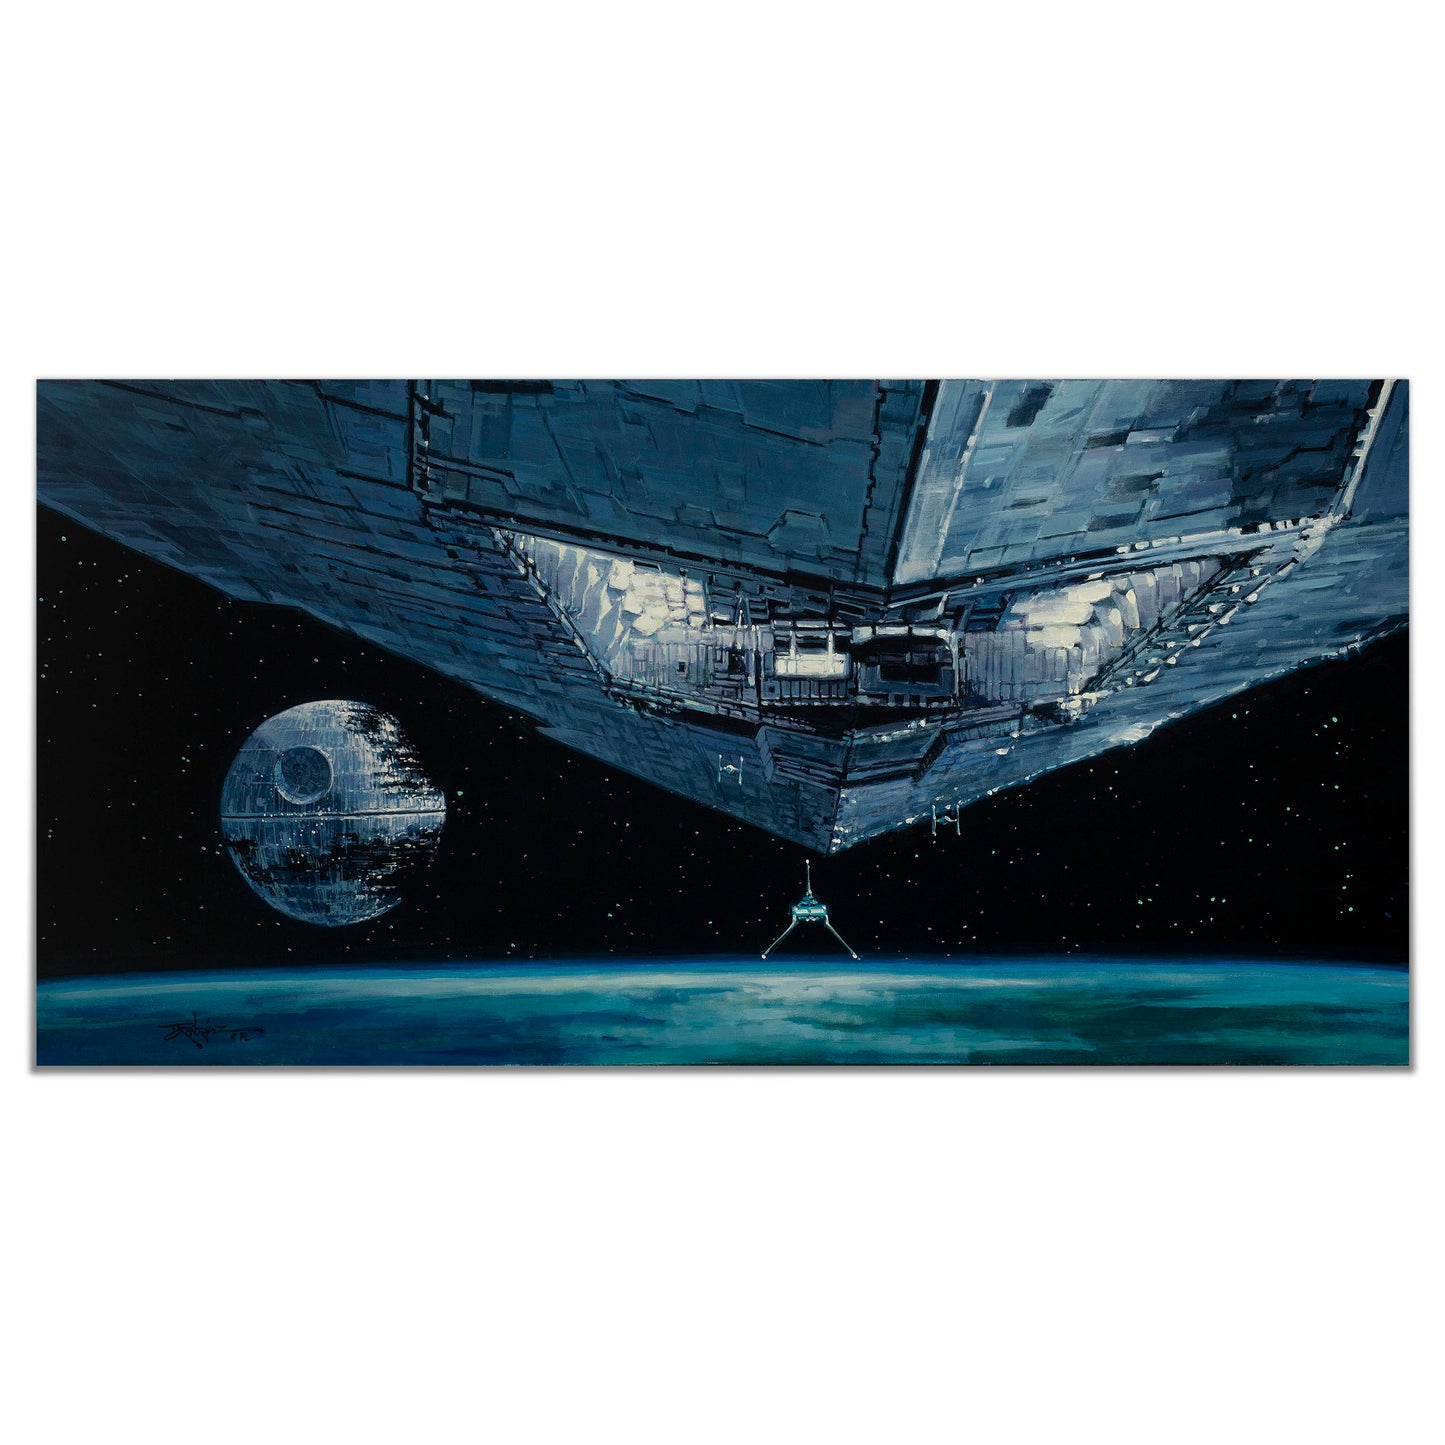 Rodel Gonzalez Star Wars "Vader's Arrival" Limited Edition Canvas Giclee